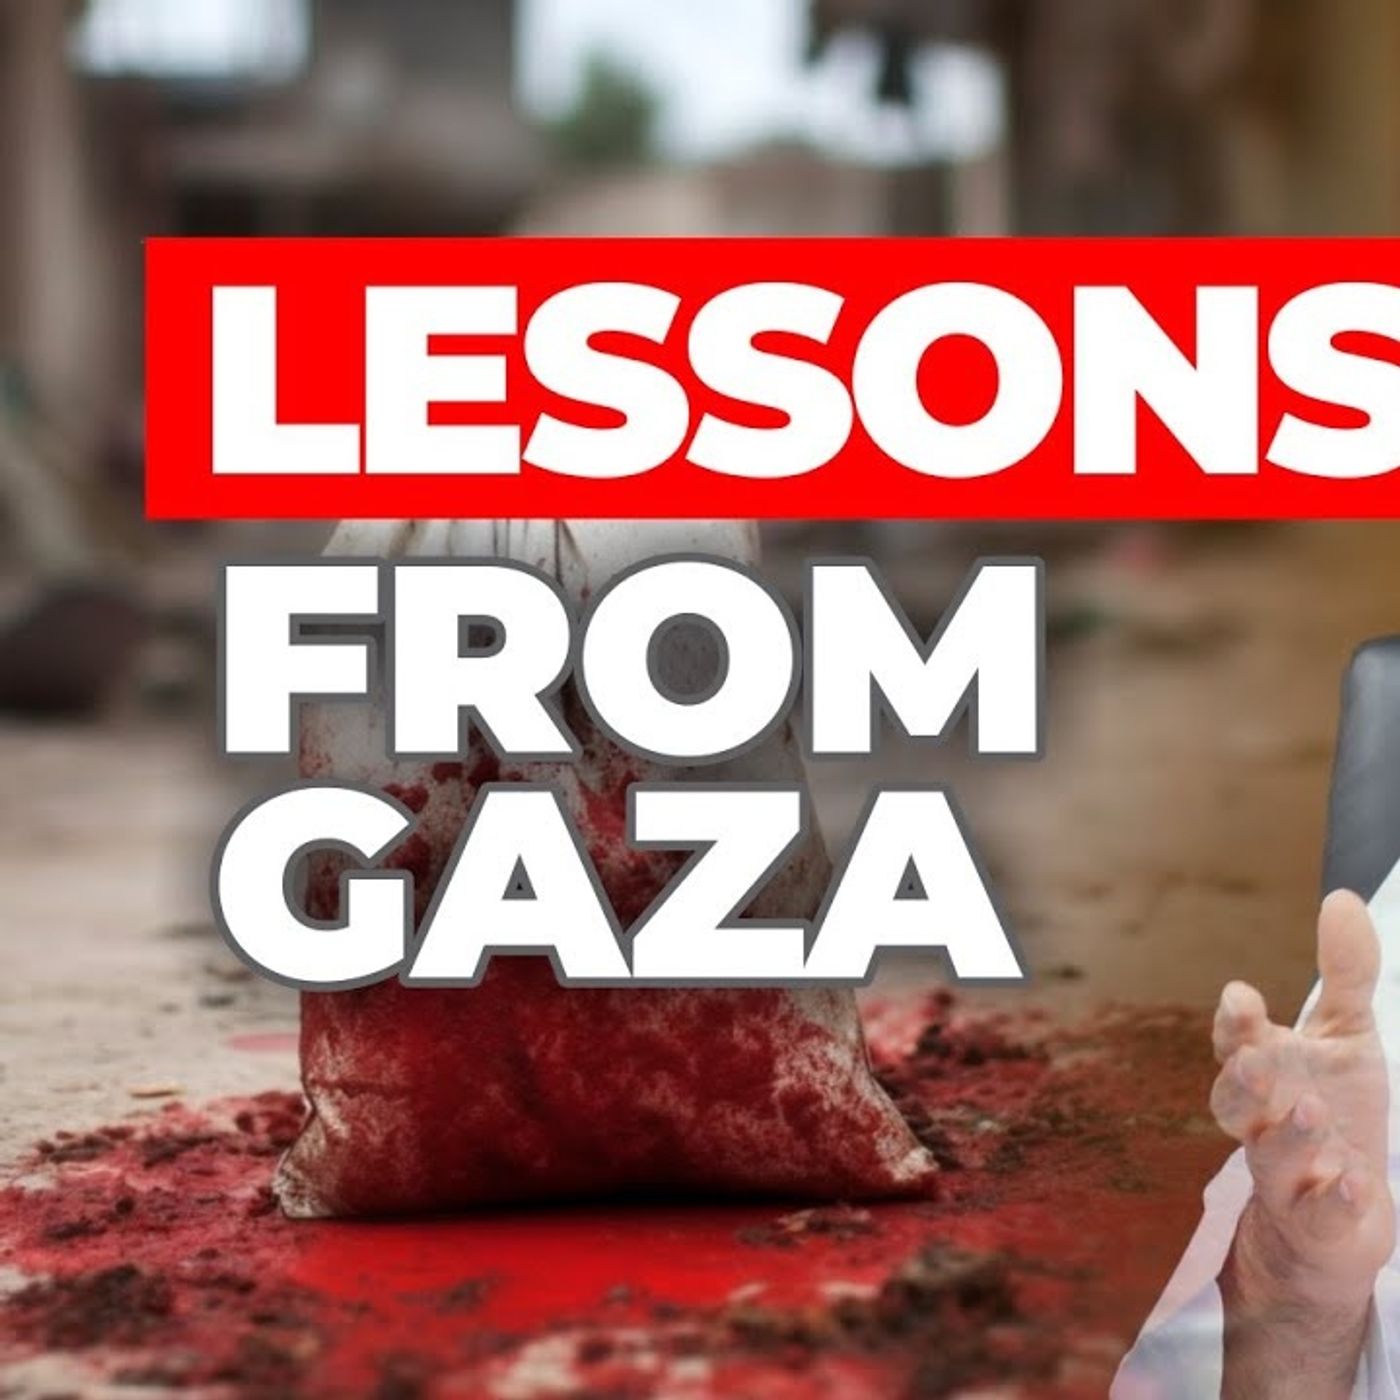 Lessons from Gaza